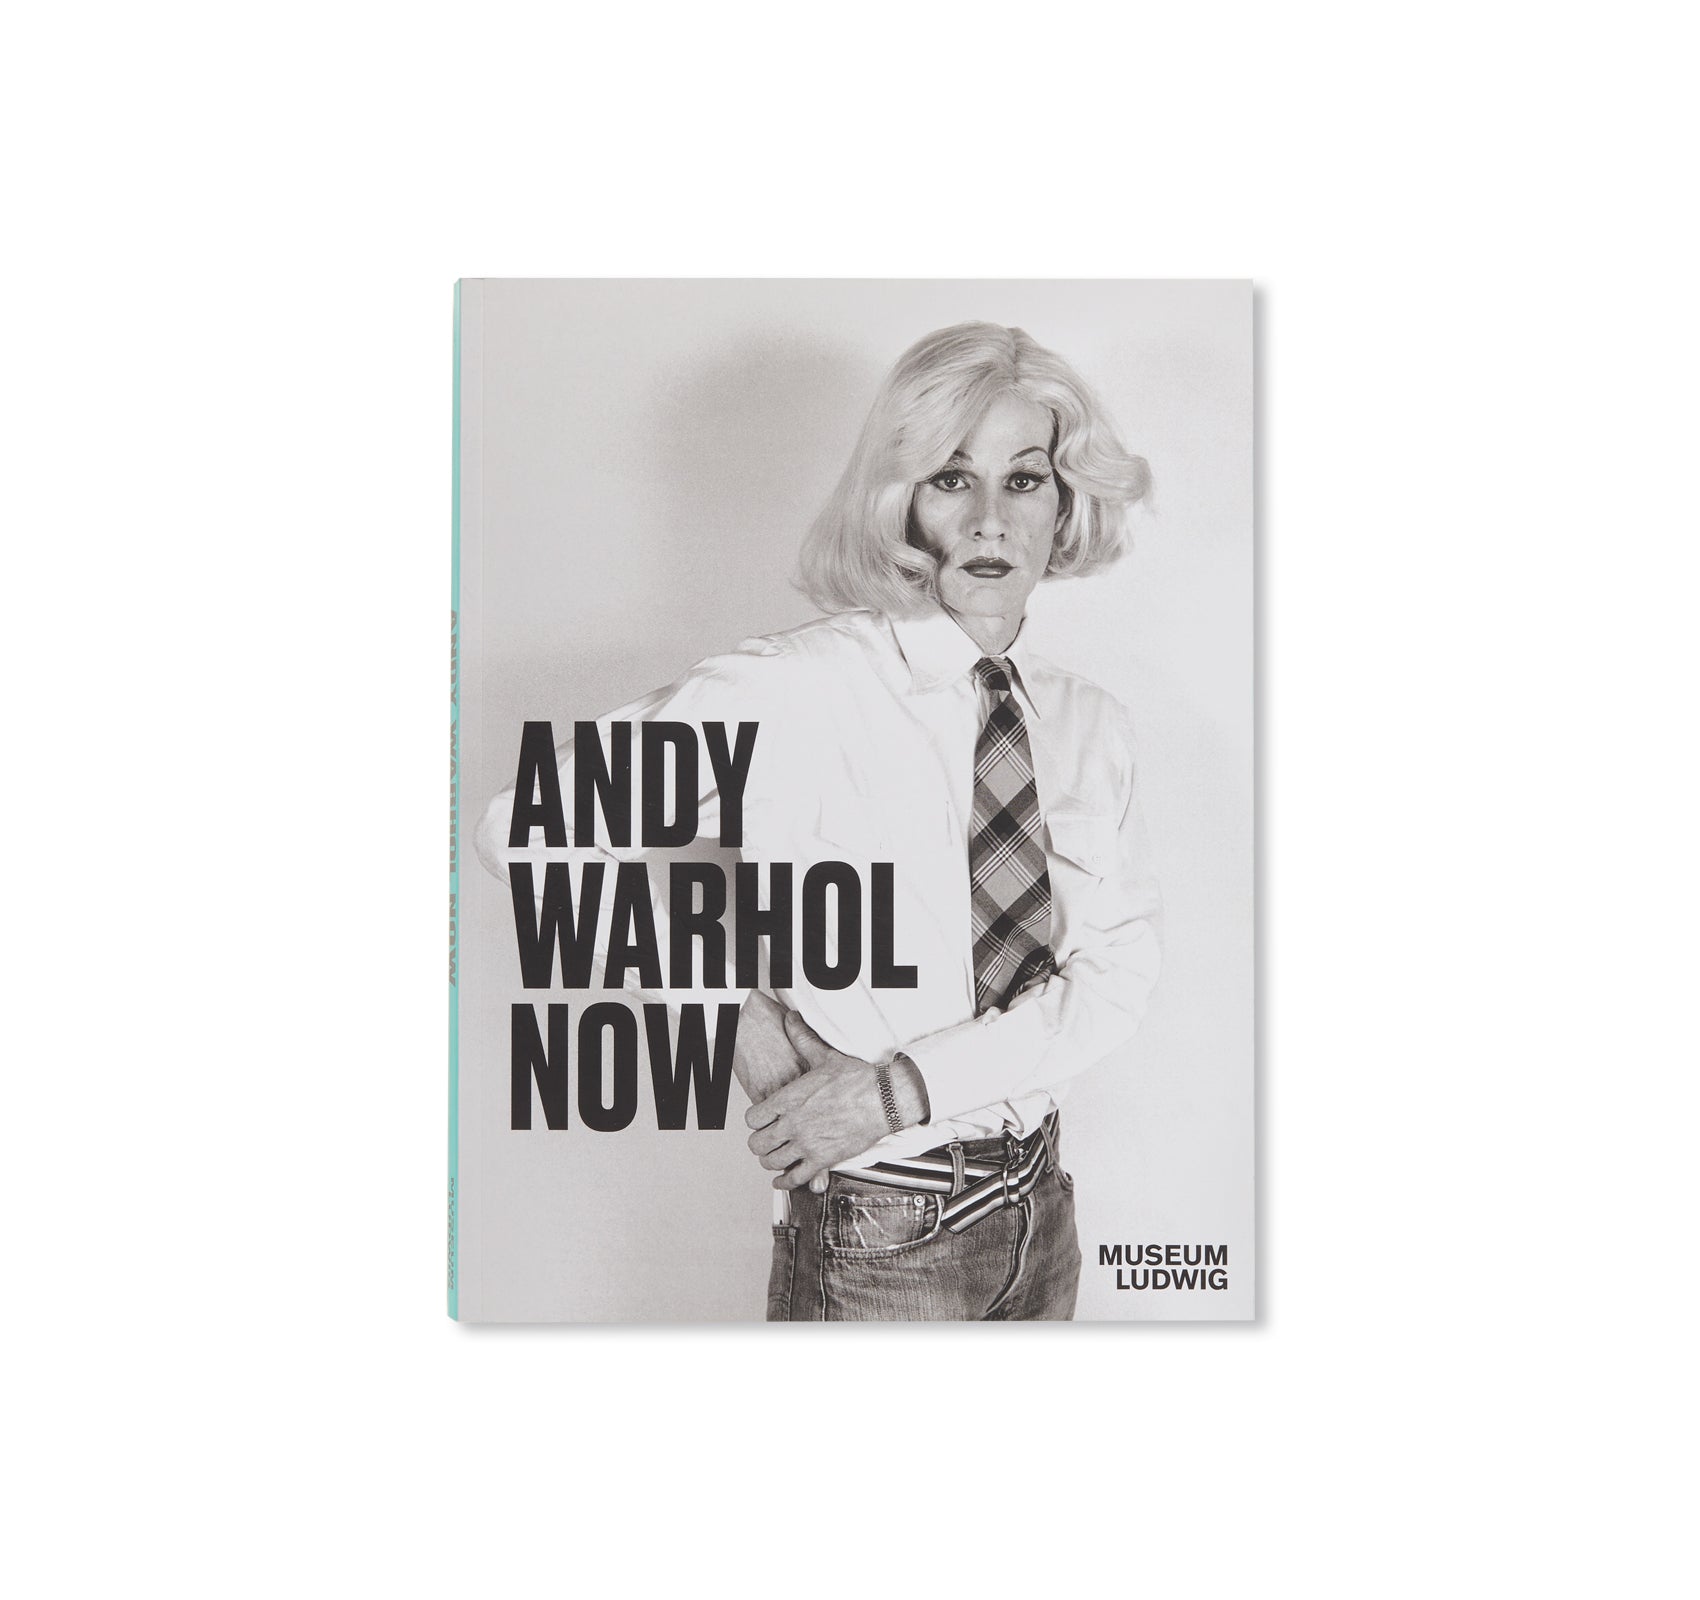 ANDY WARHOL: NOW by Andy Warhol